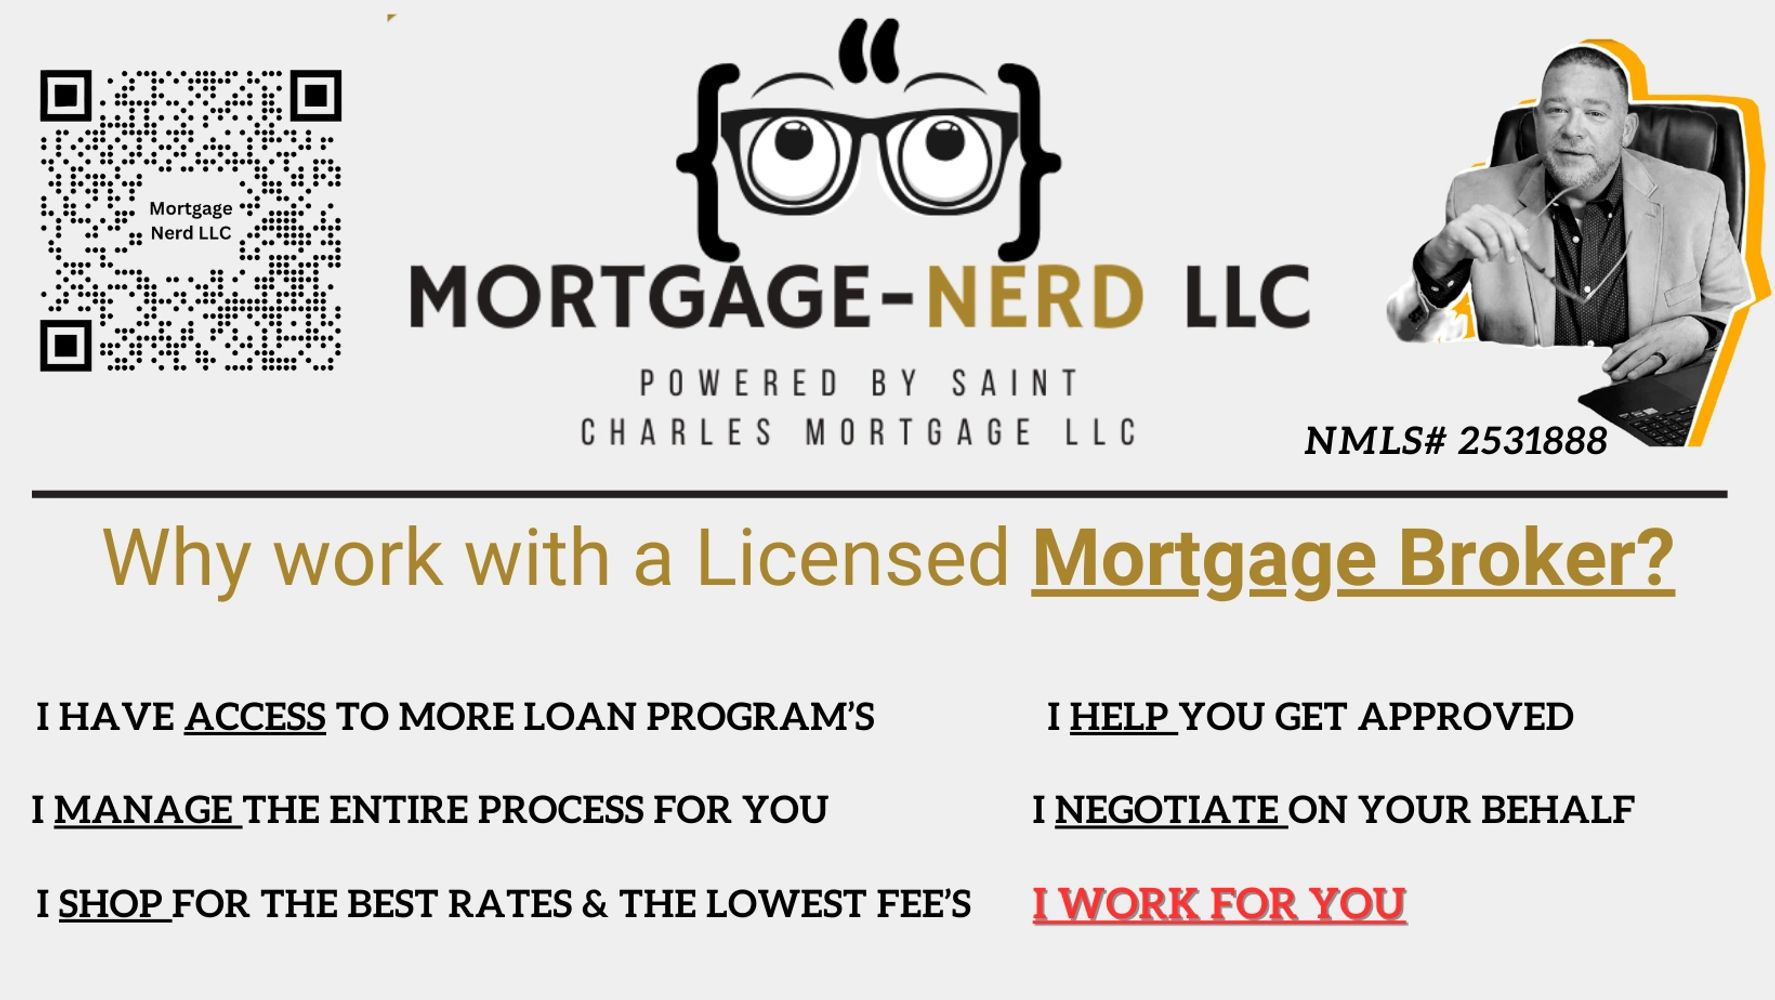 Why you should choose to work with a Licensed MORTGAGE BROKER